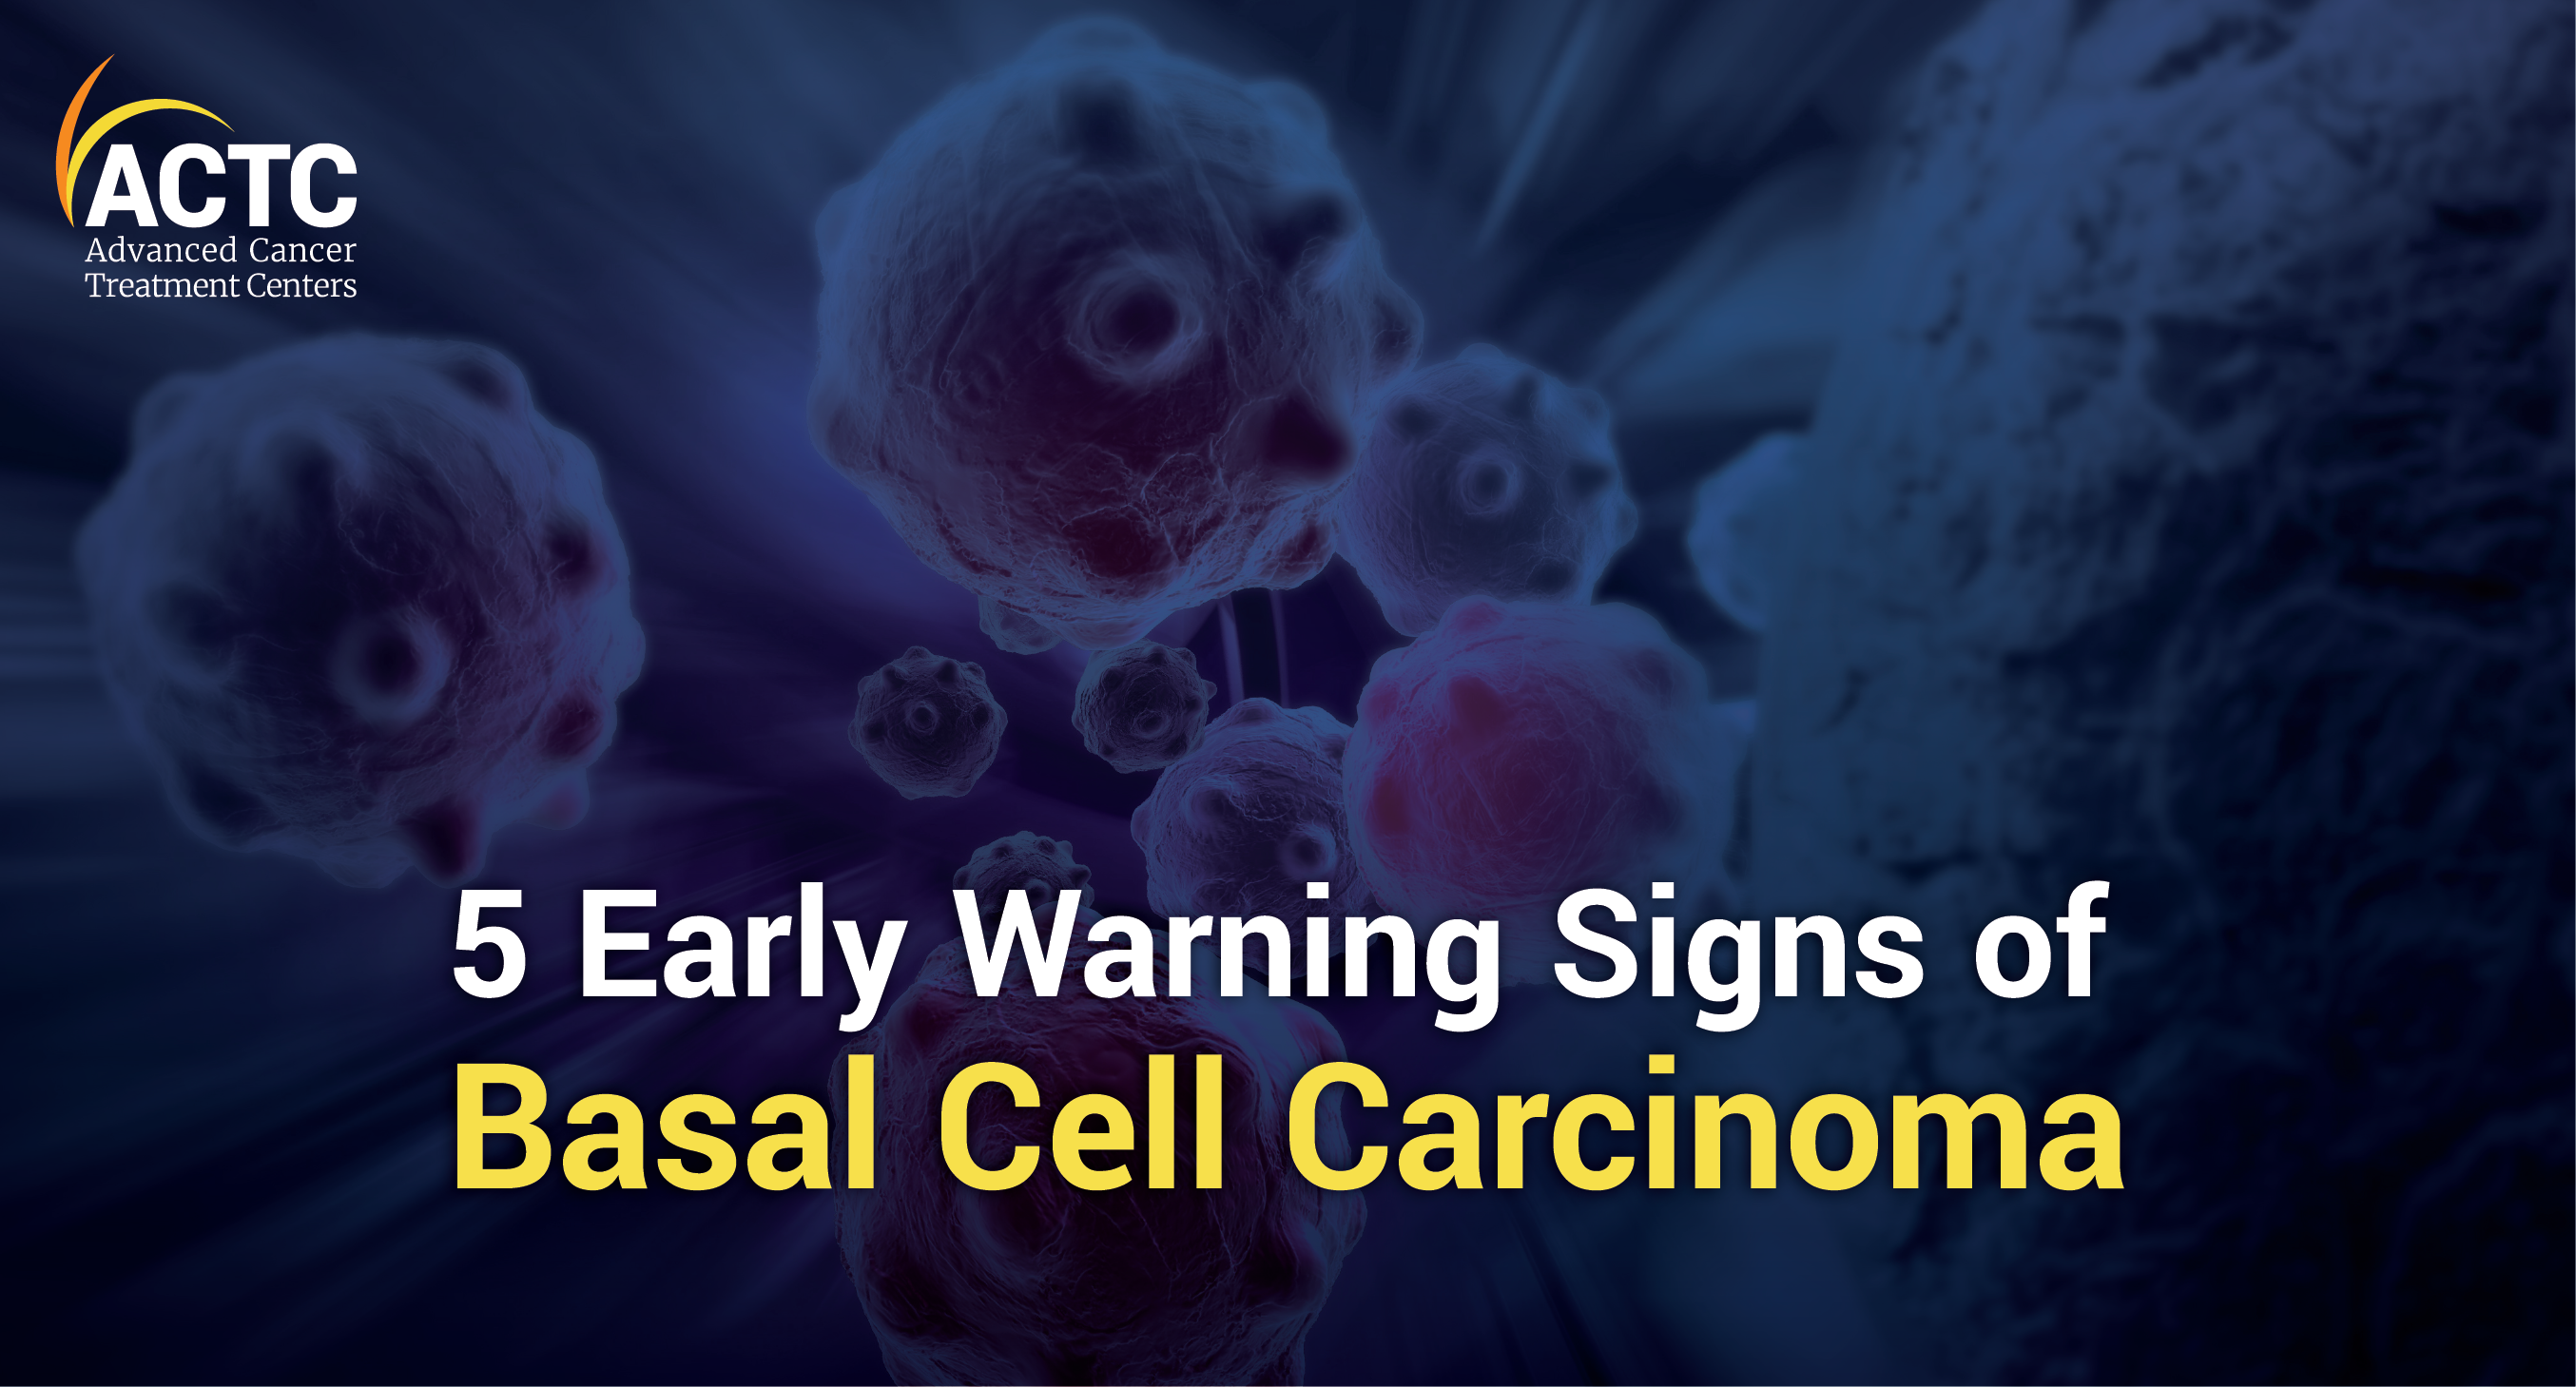  5 Early Warning Signs of  Basal Cell Carcinoma